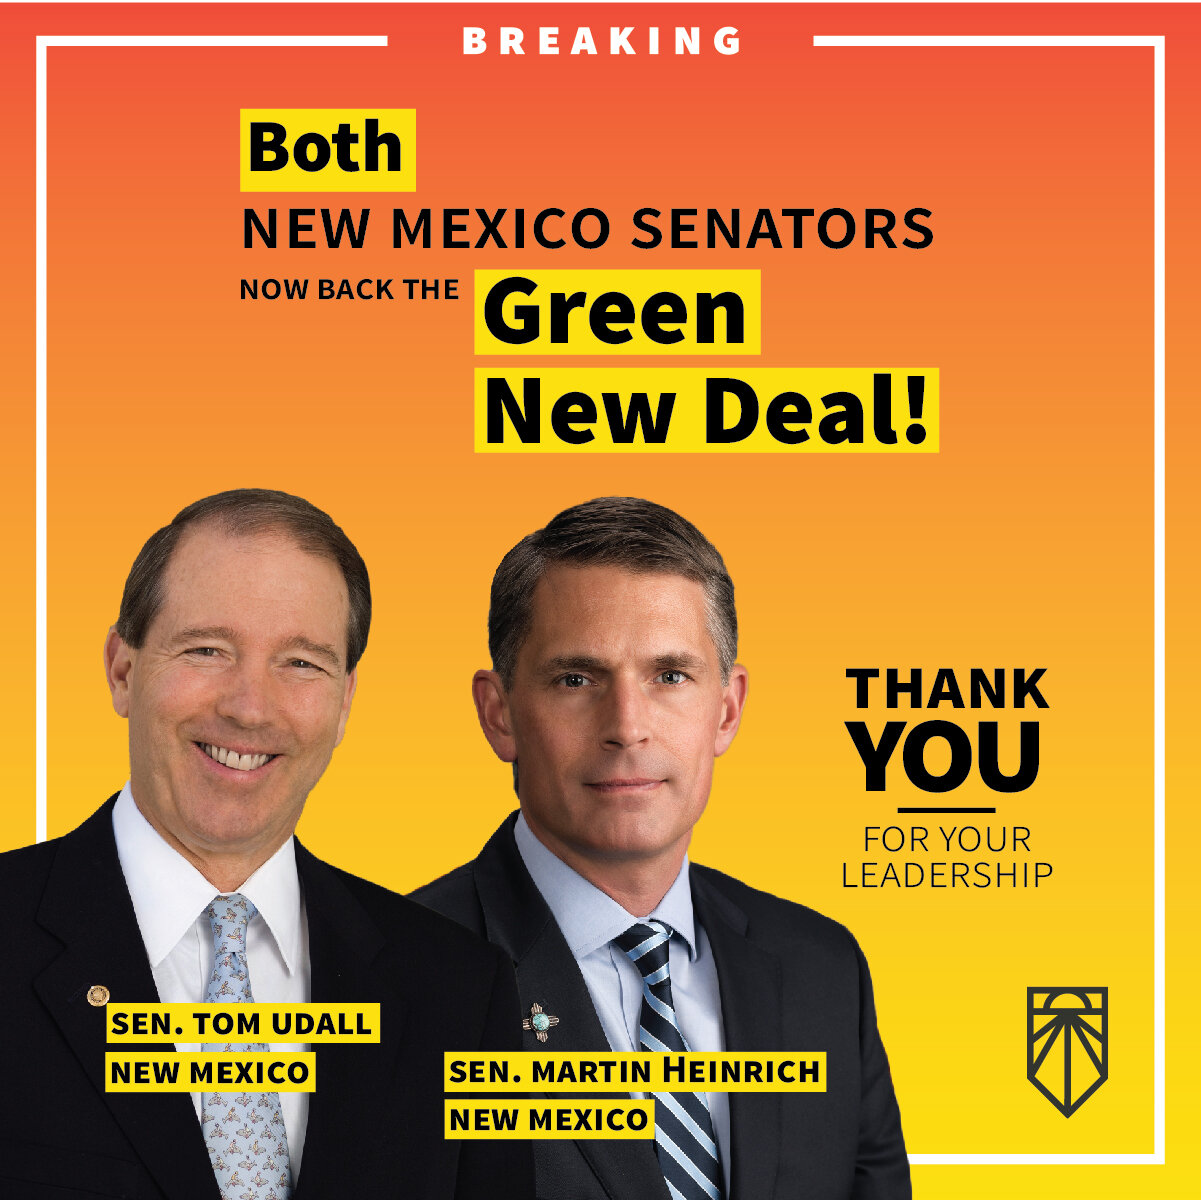 celebration New Mexico green new deal backers option 2-03.jpg